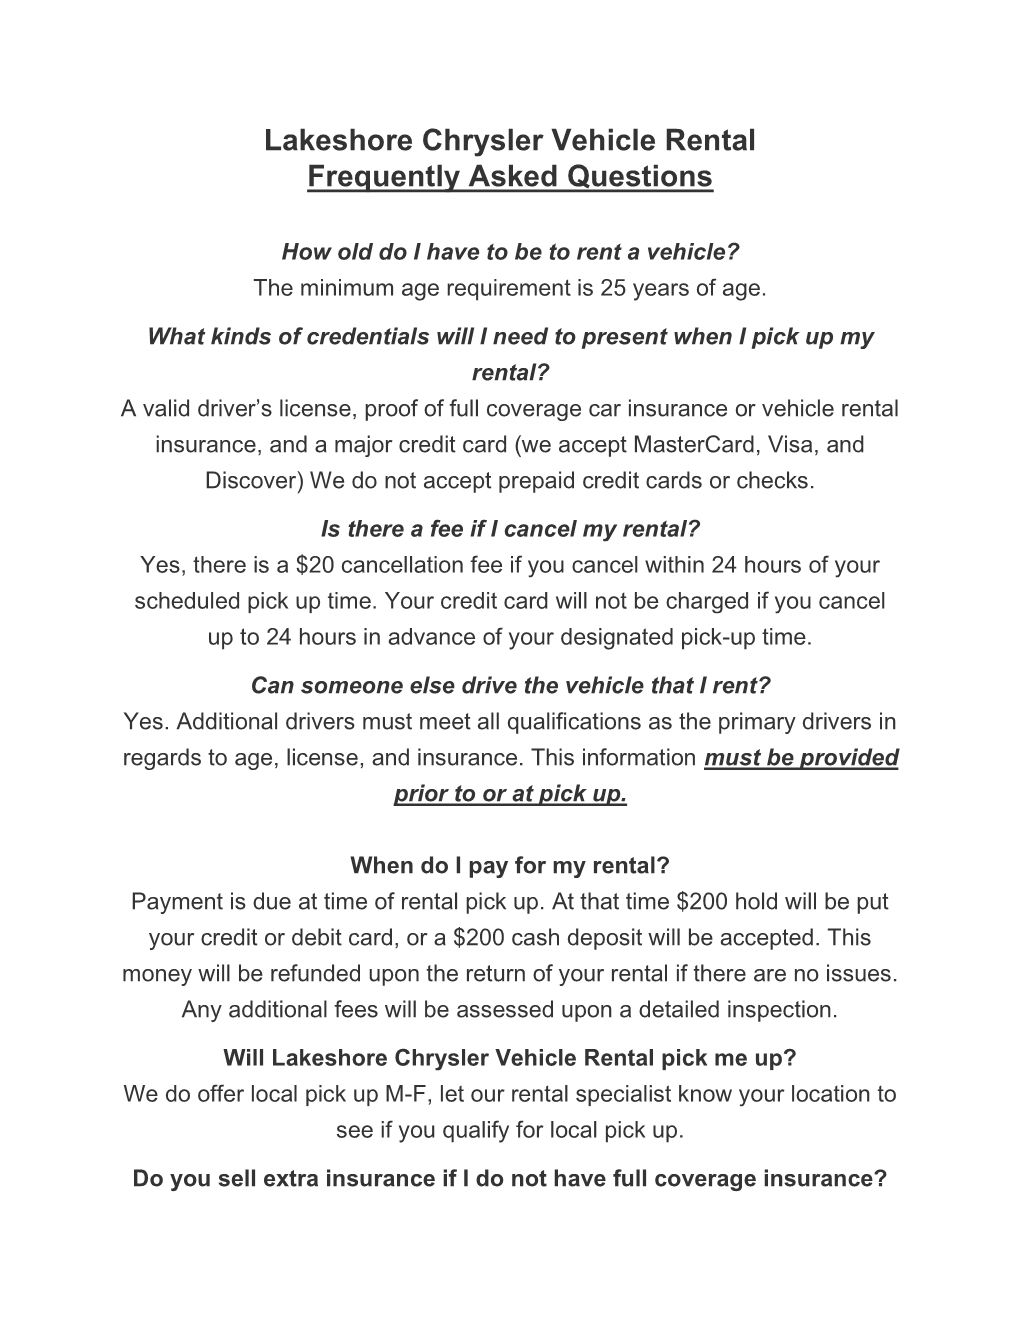 Lakeshore Chrysler Vehicle Rental Frequently Asked Questions